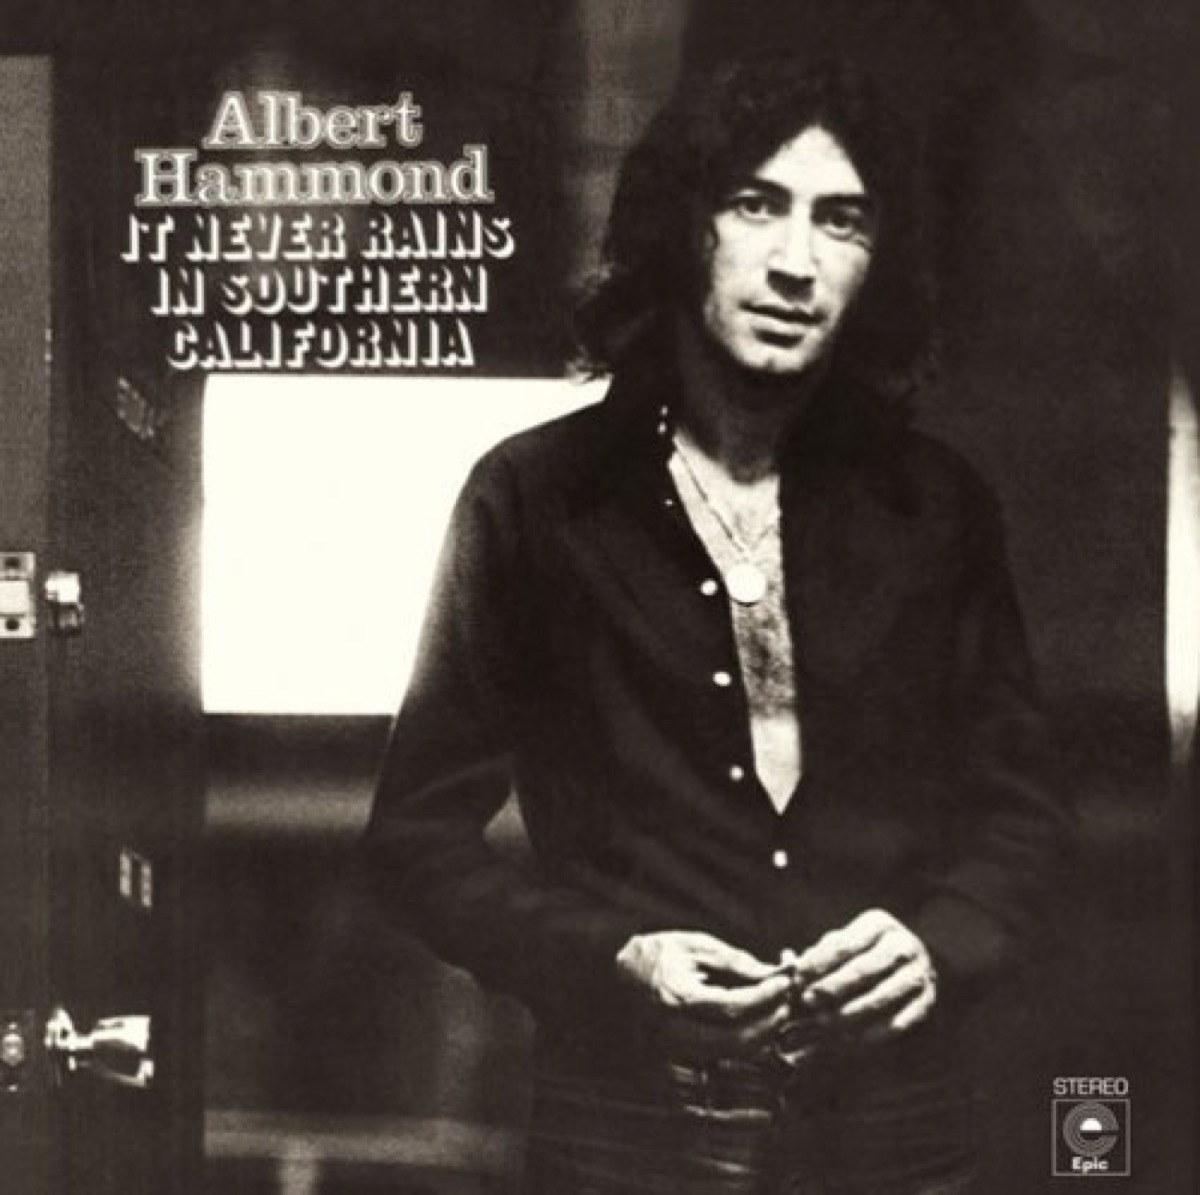 It Never Rains in Southern California by Albert Hammond